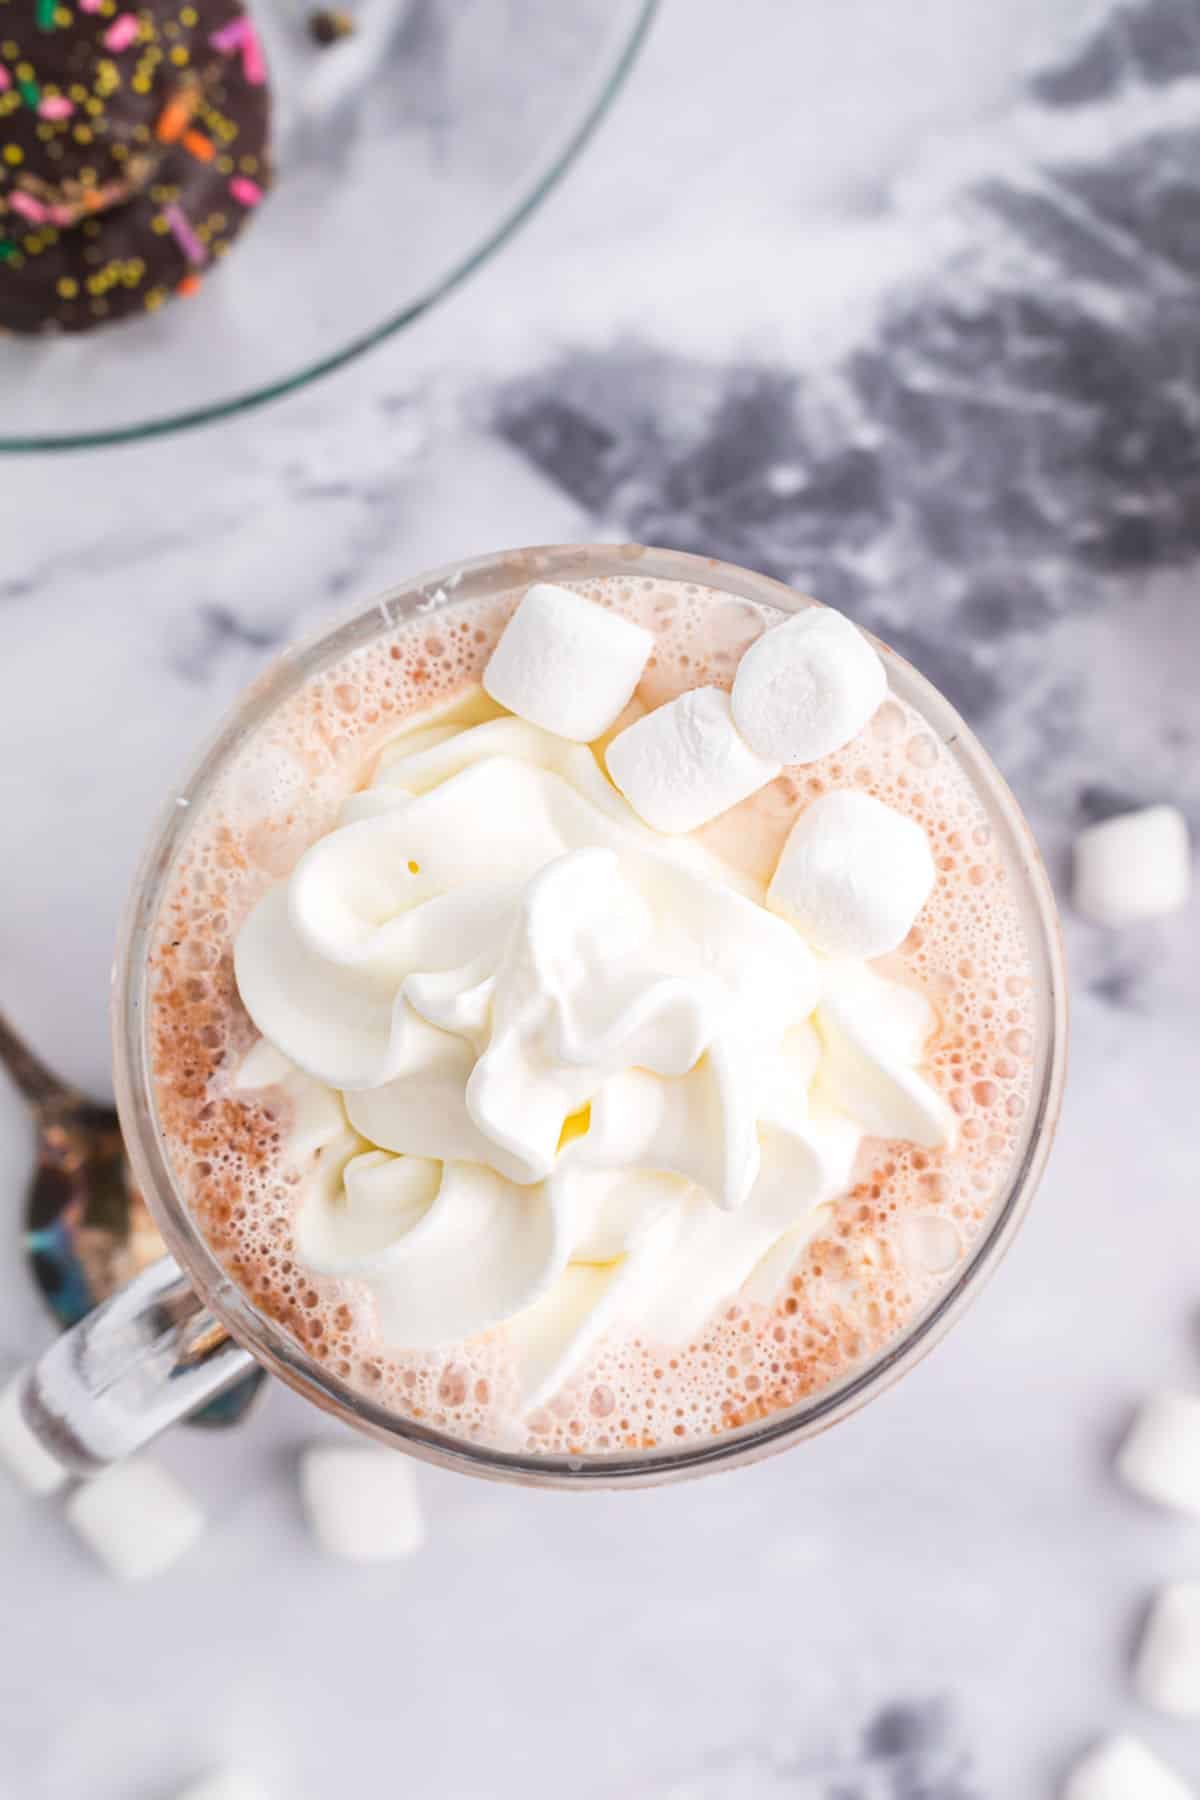 hot chocolate topped with whipped cream and marshmallows.